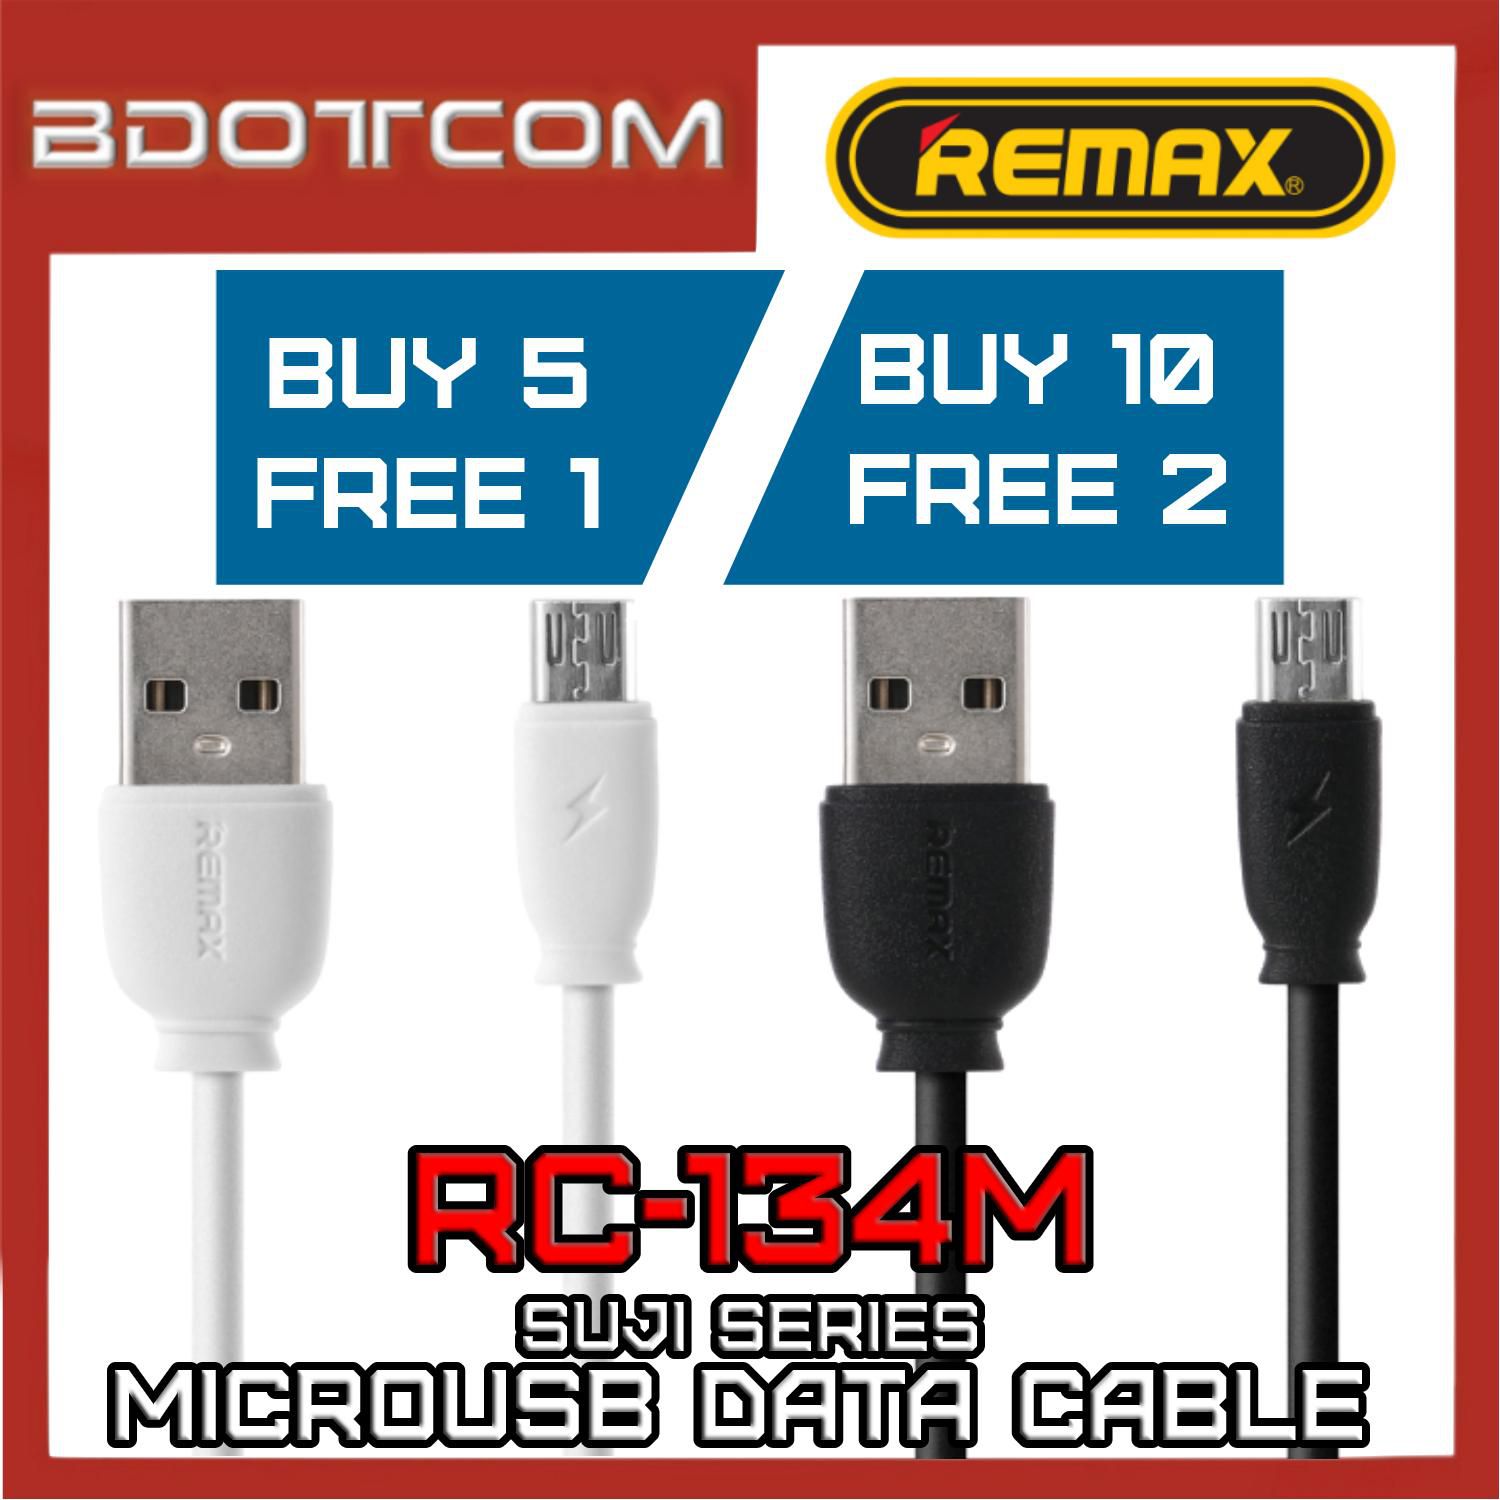 Remax RC-RC134m Suji series 2.1A MicroUSB Smart Chip Data Cable